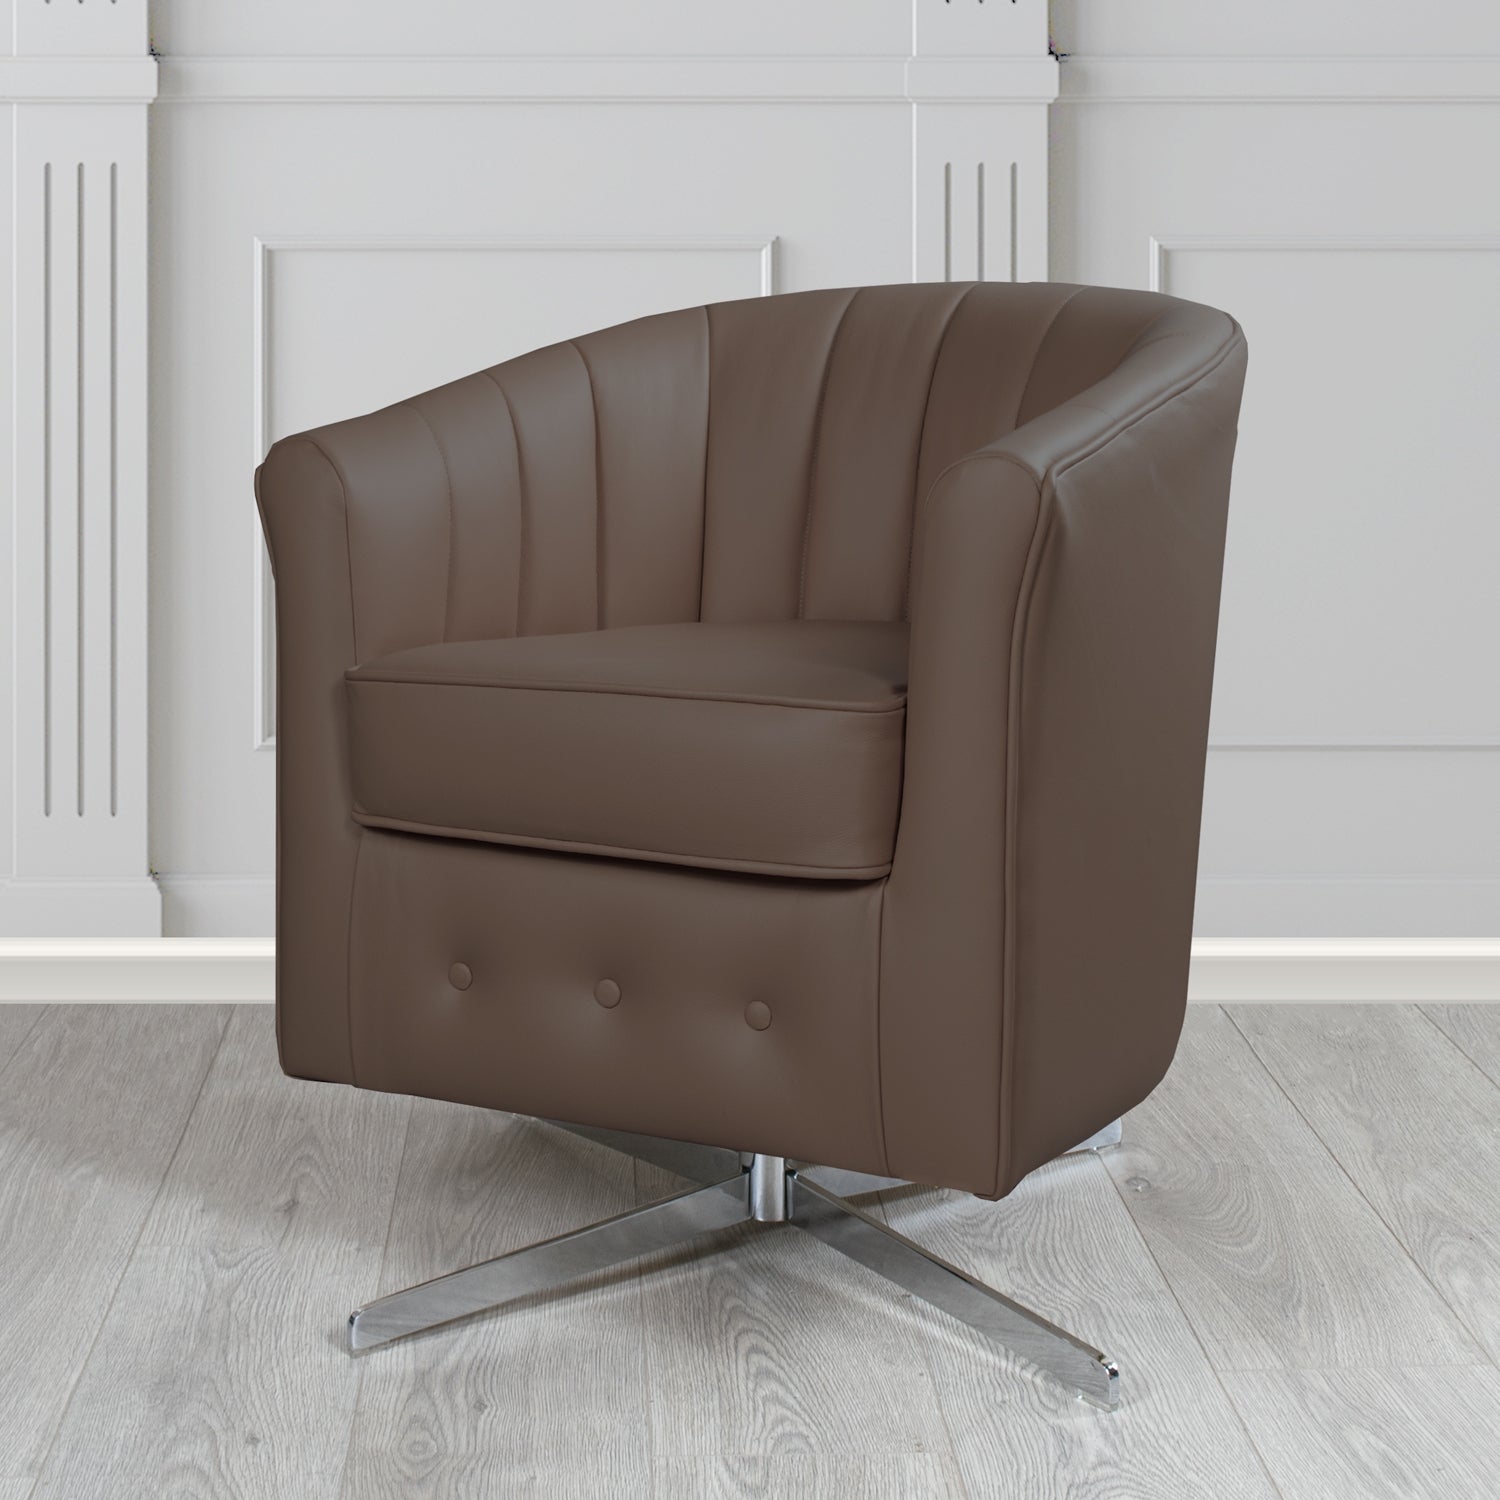 Doha Swivel Tub Chair in Vele Bournville Genuine Leather